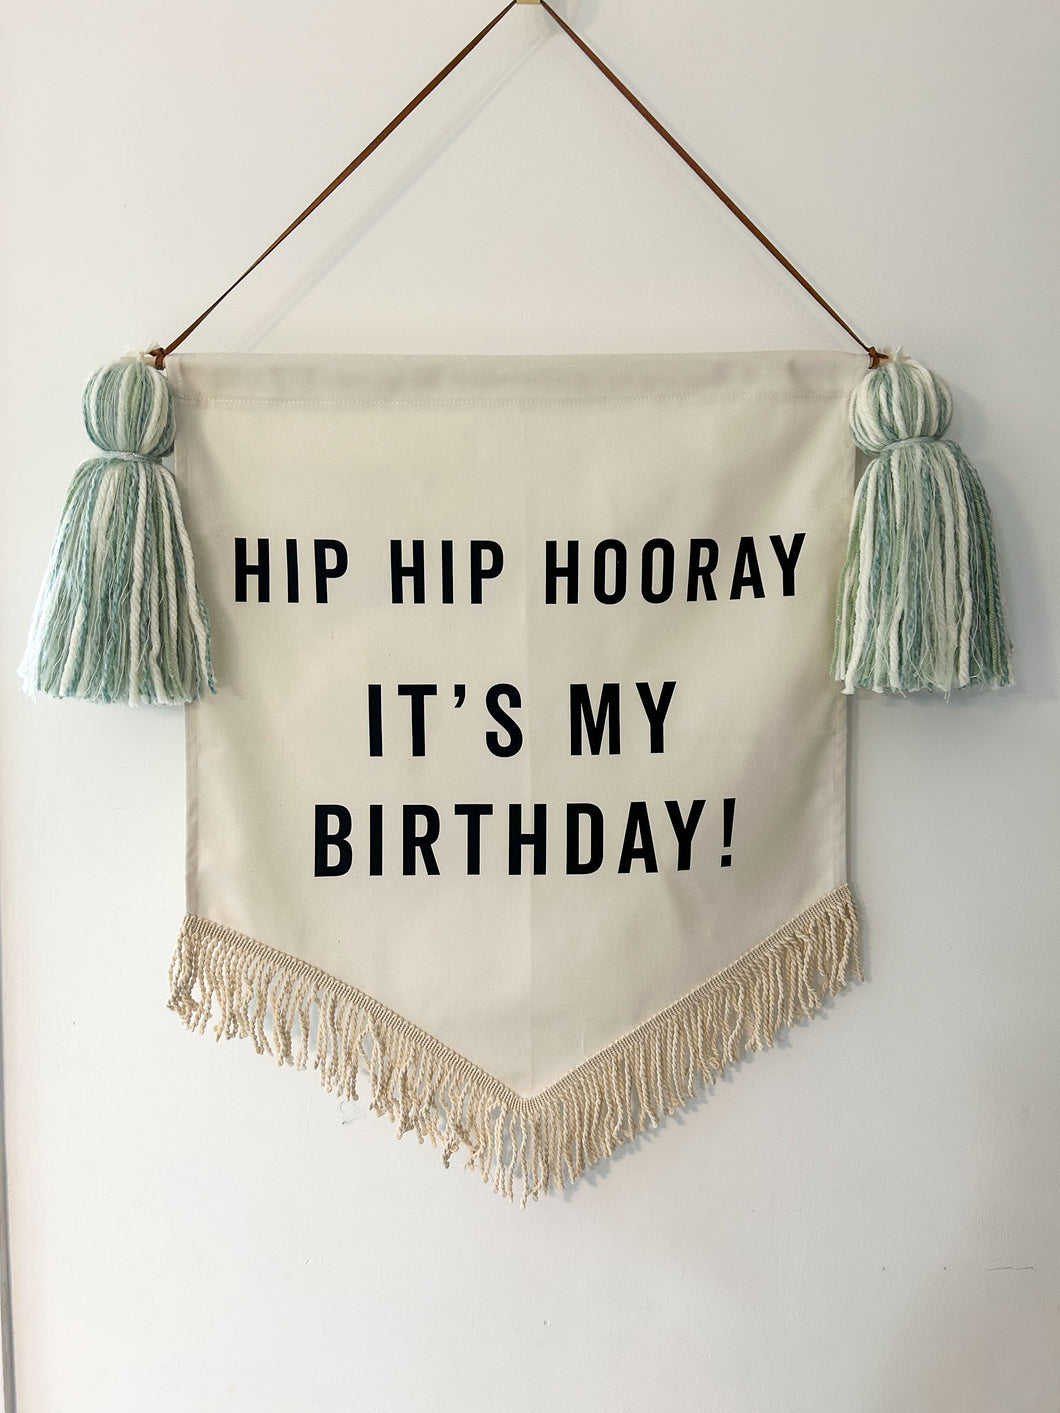 7. Limited Edition ‘Hip Hip Hooray It’s My Birthday’ Large Banner